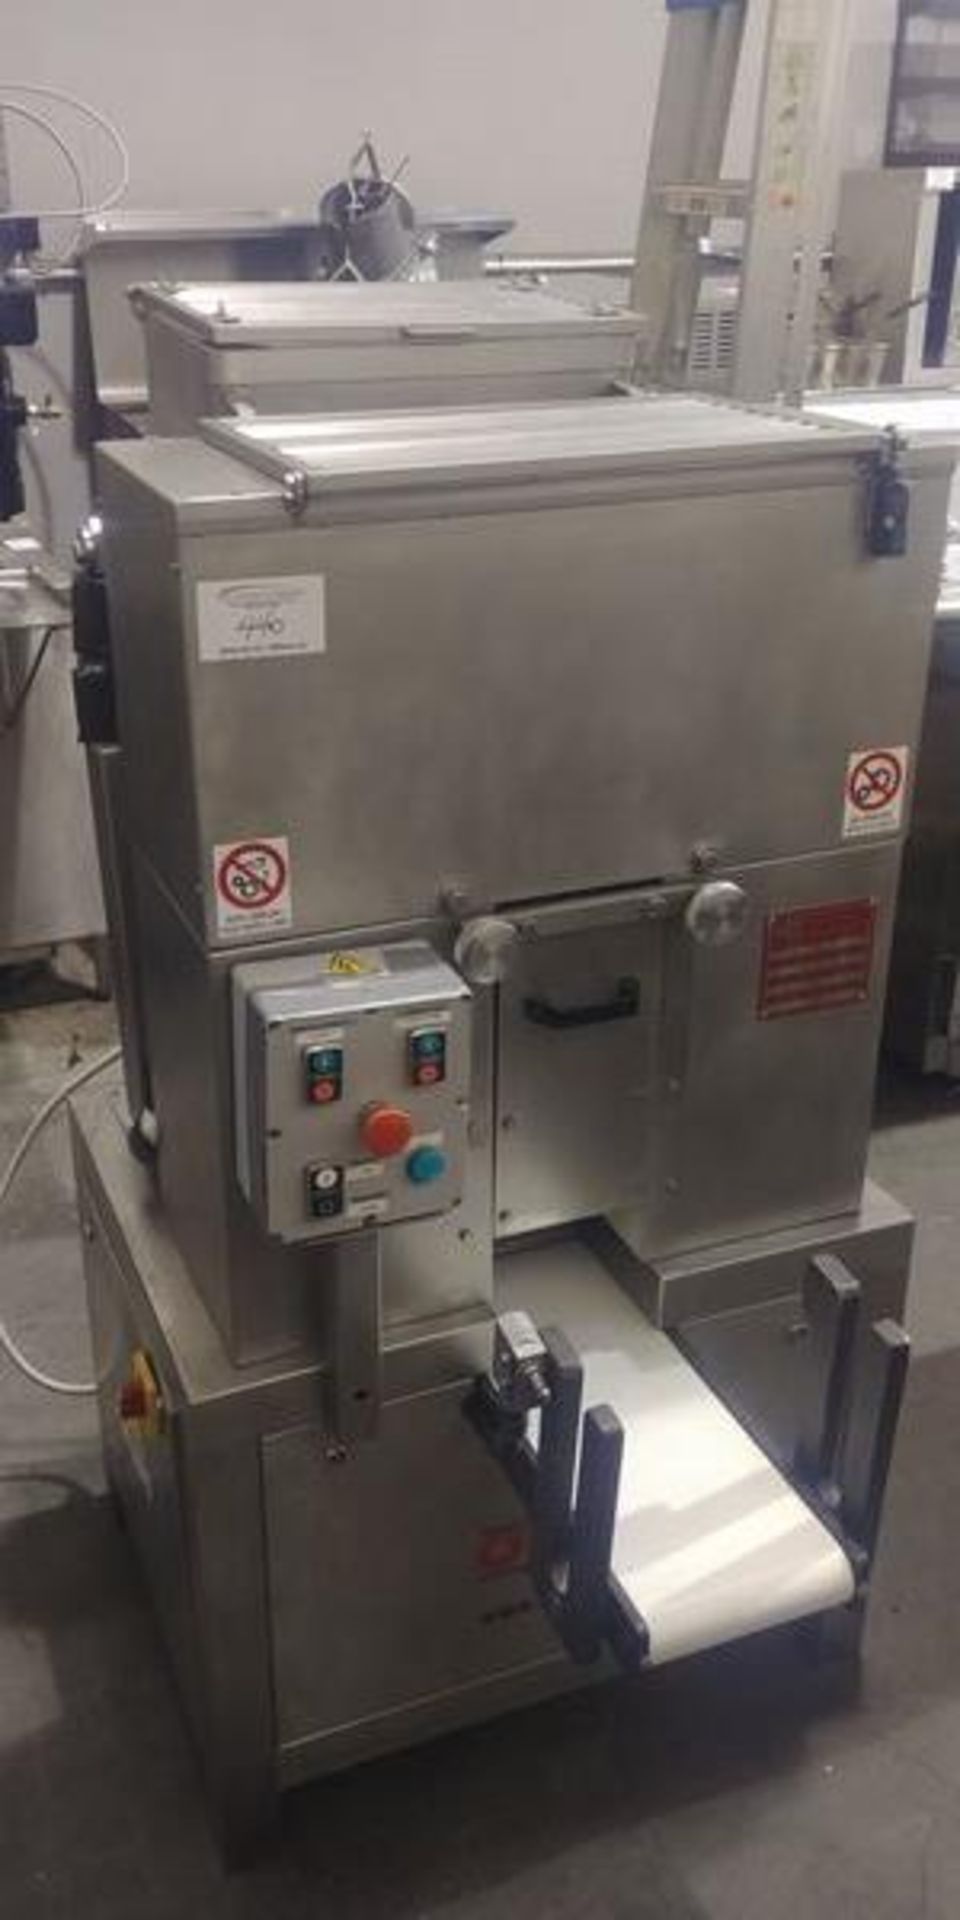 Ostoni Automatic Sheeter-Kneader - Model A160-REV - Purchased New 2017 - New Over $23,000.00